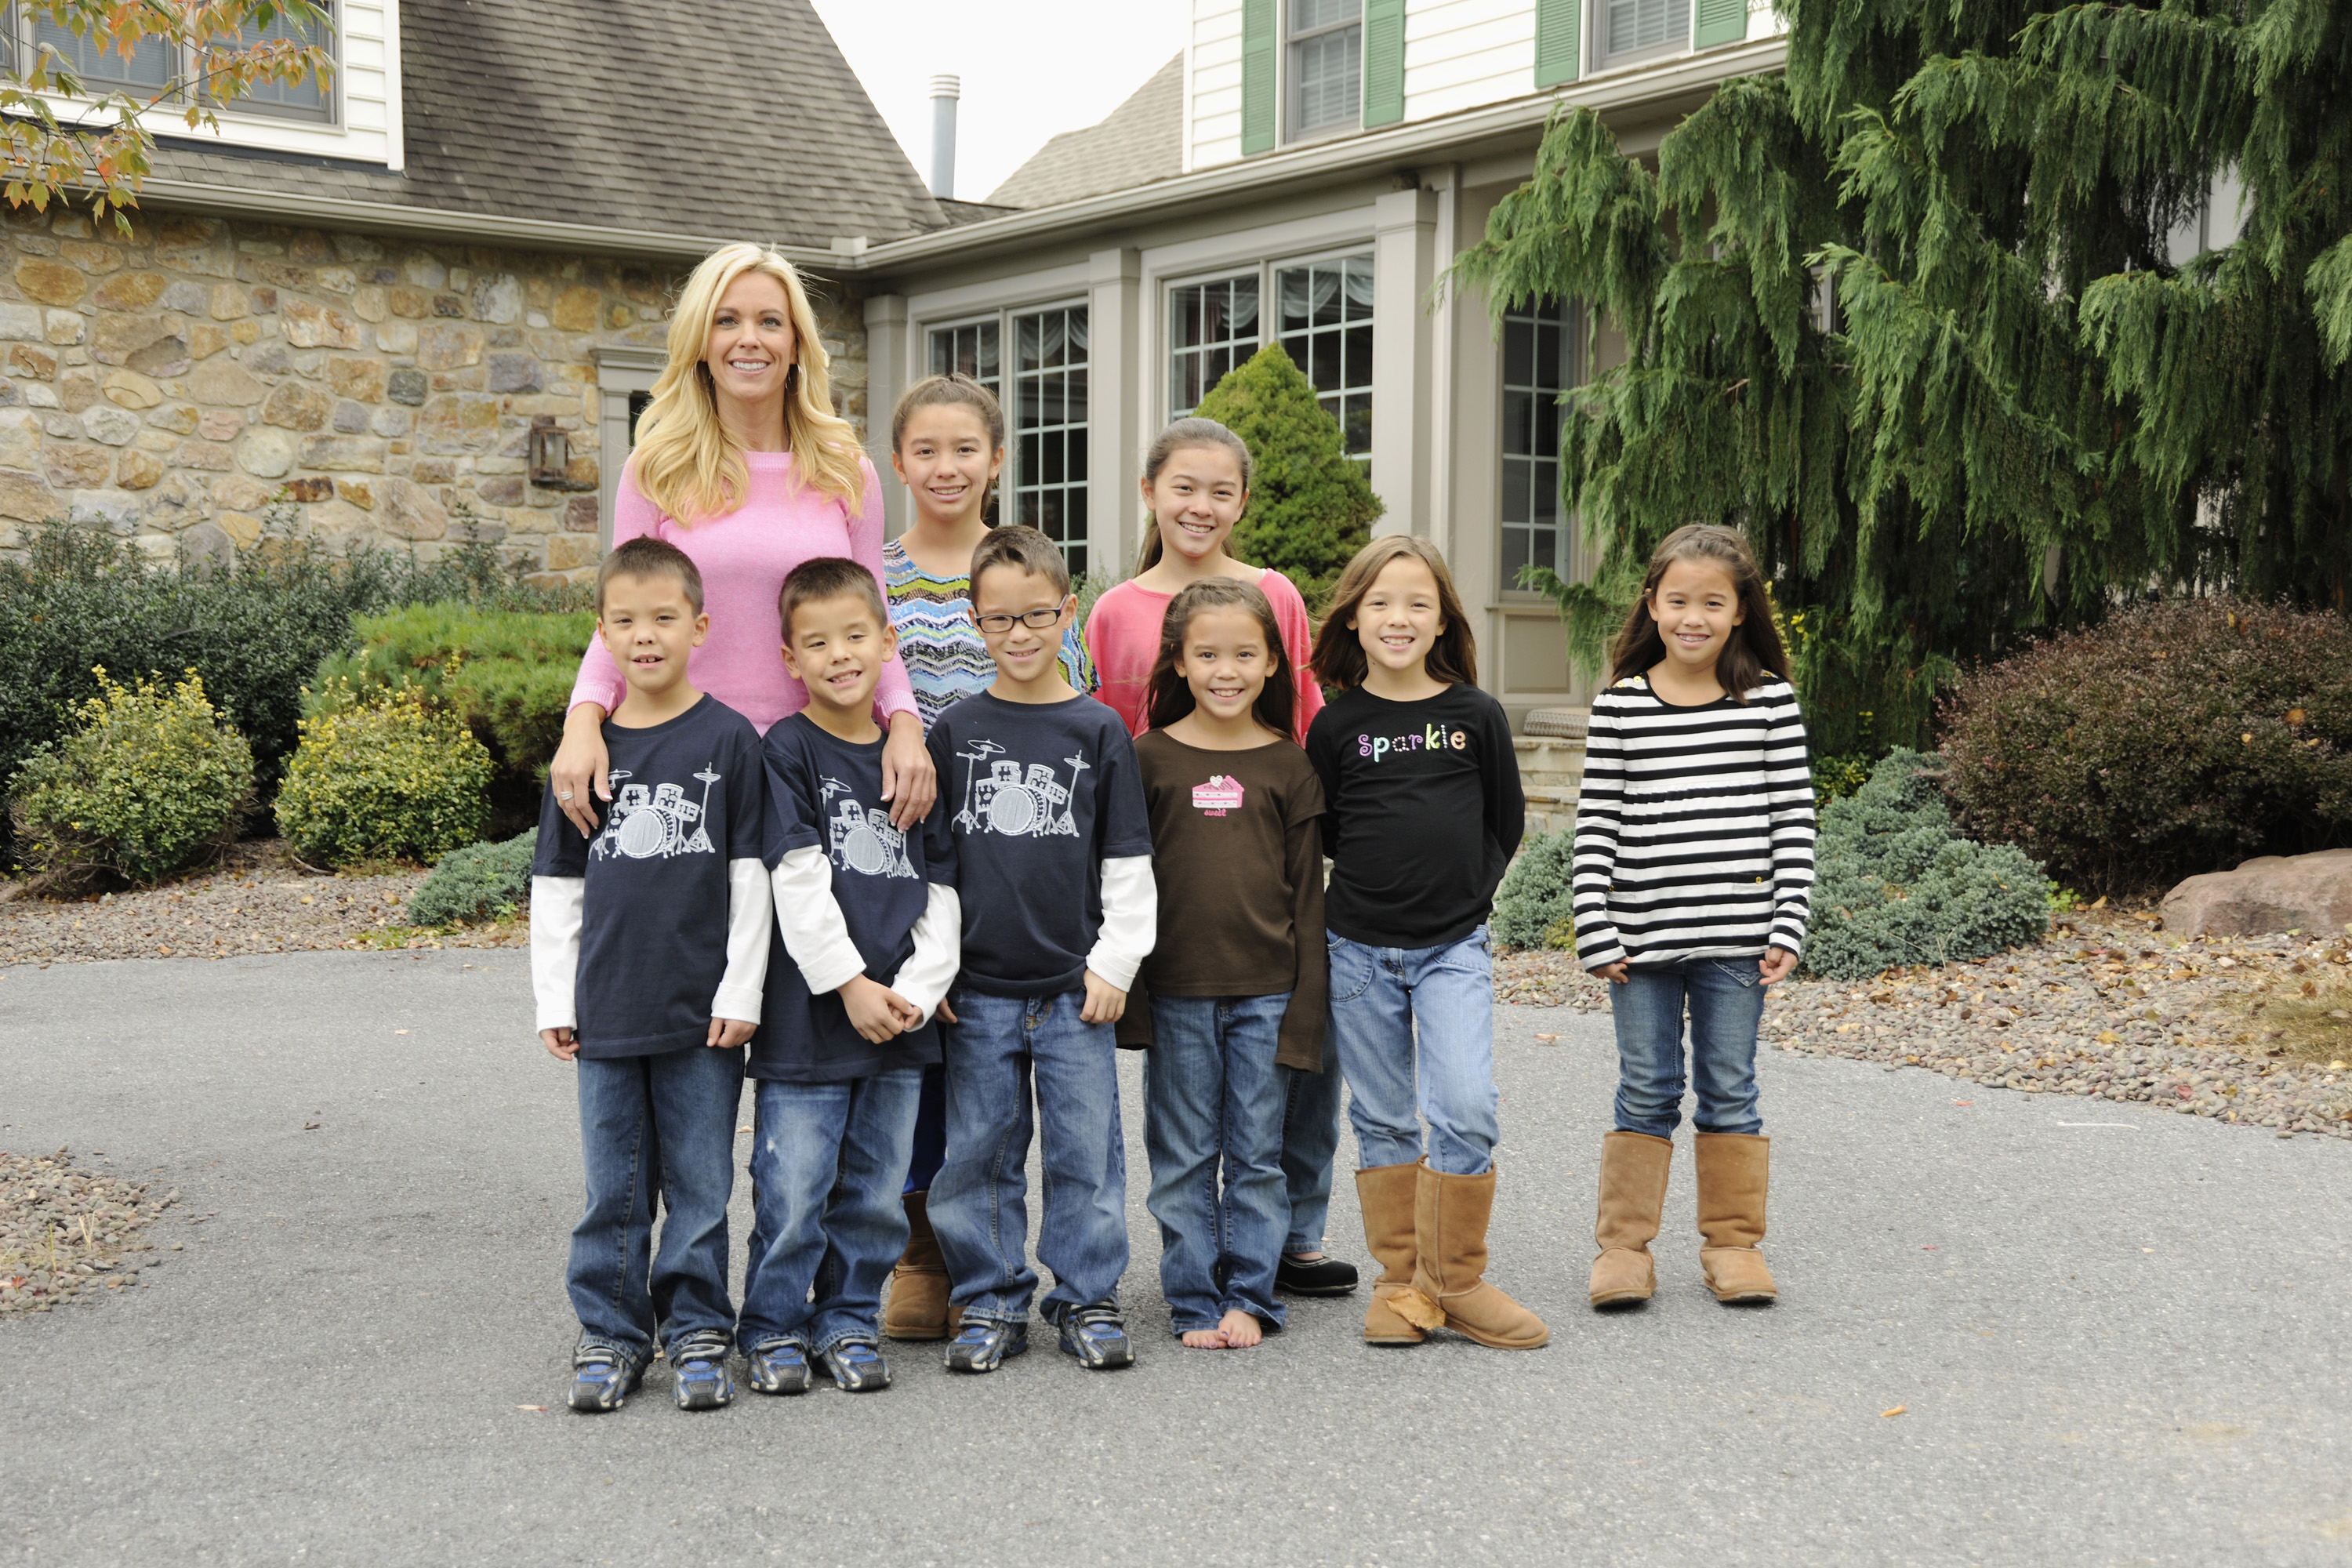 Kate Gosselin and her eight children, on October 14, 2012. | Source: Getty Images